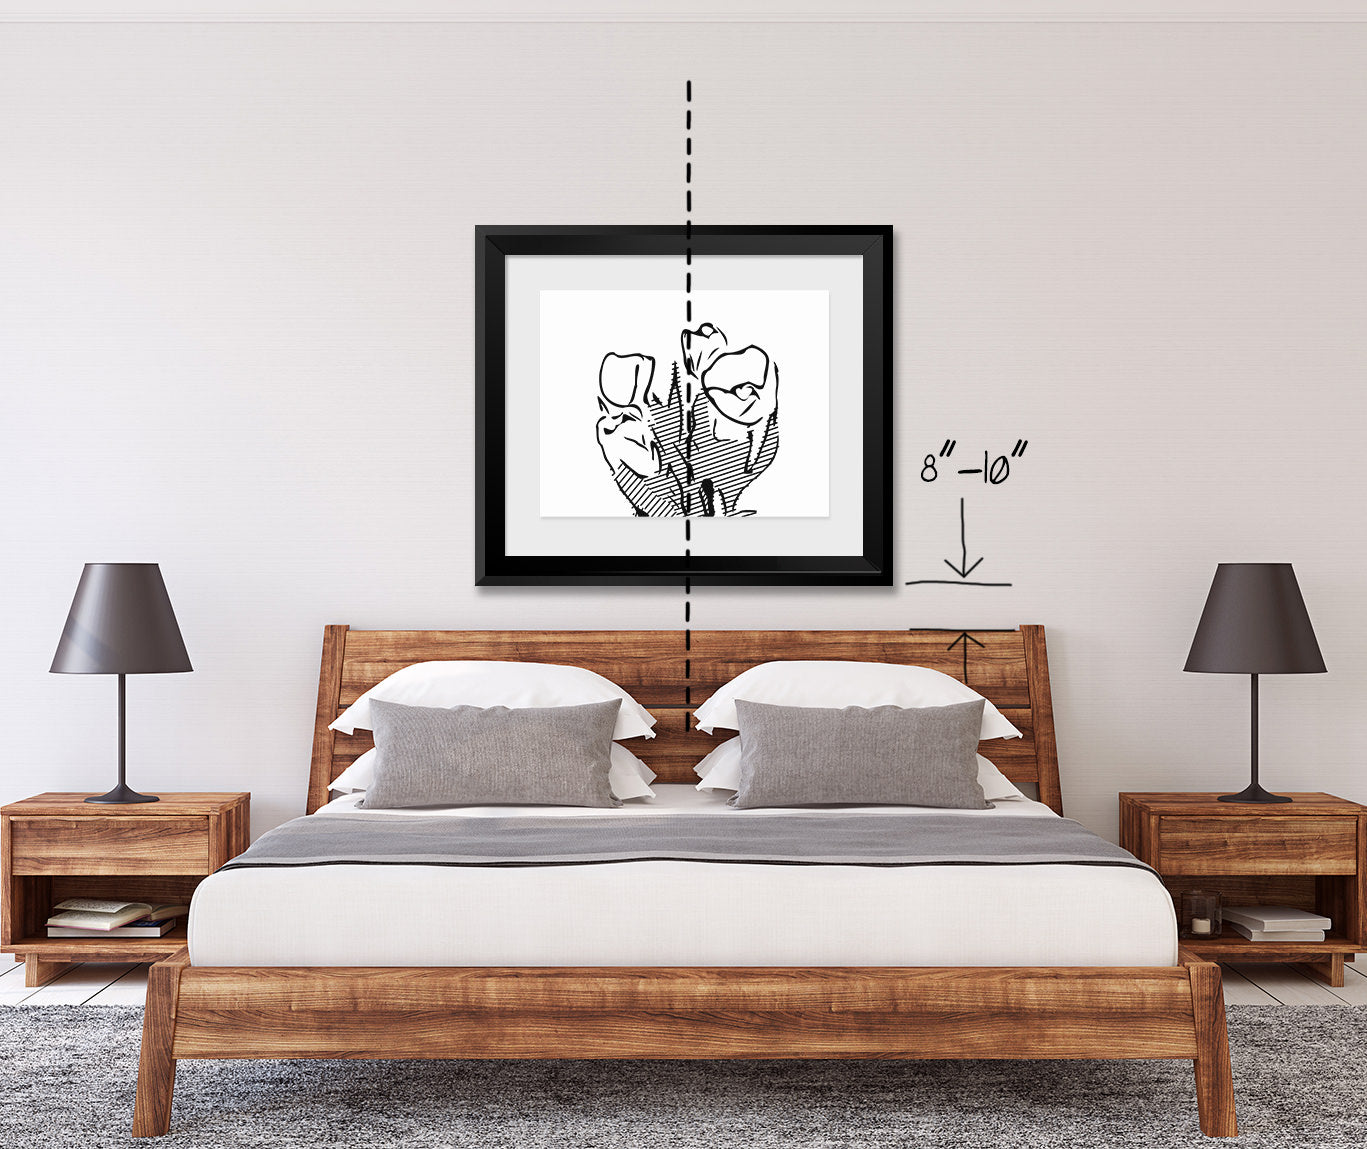 How to align artwork over a bed